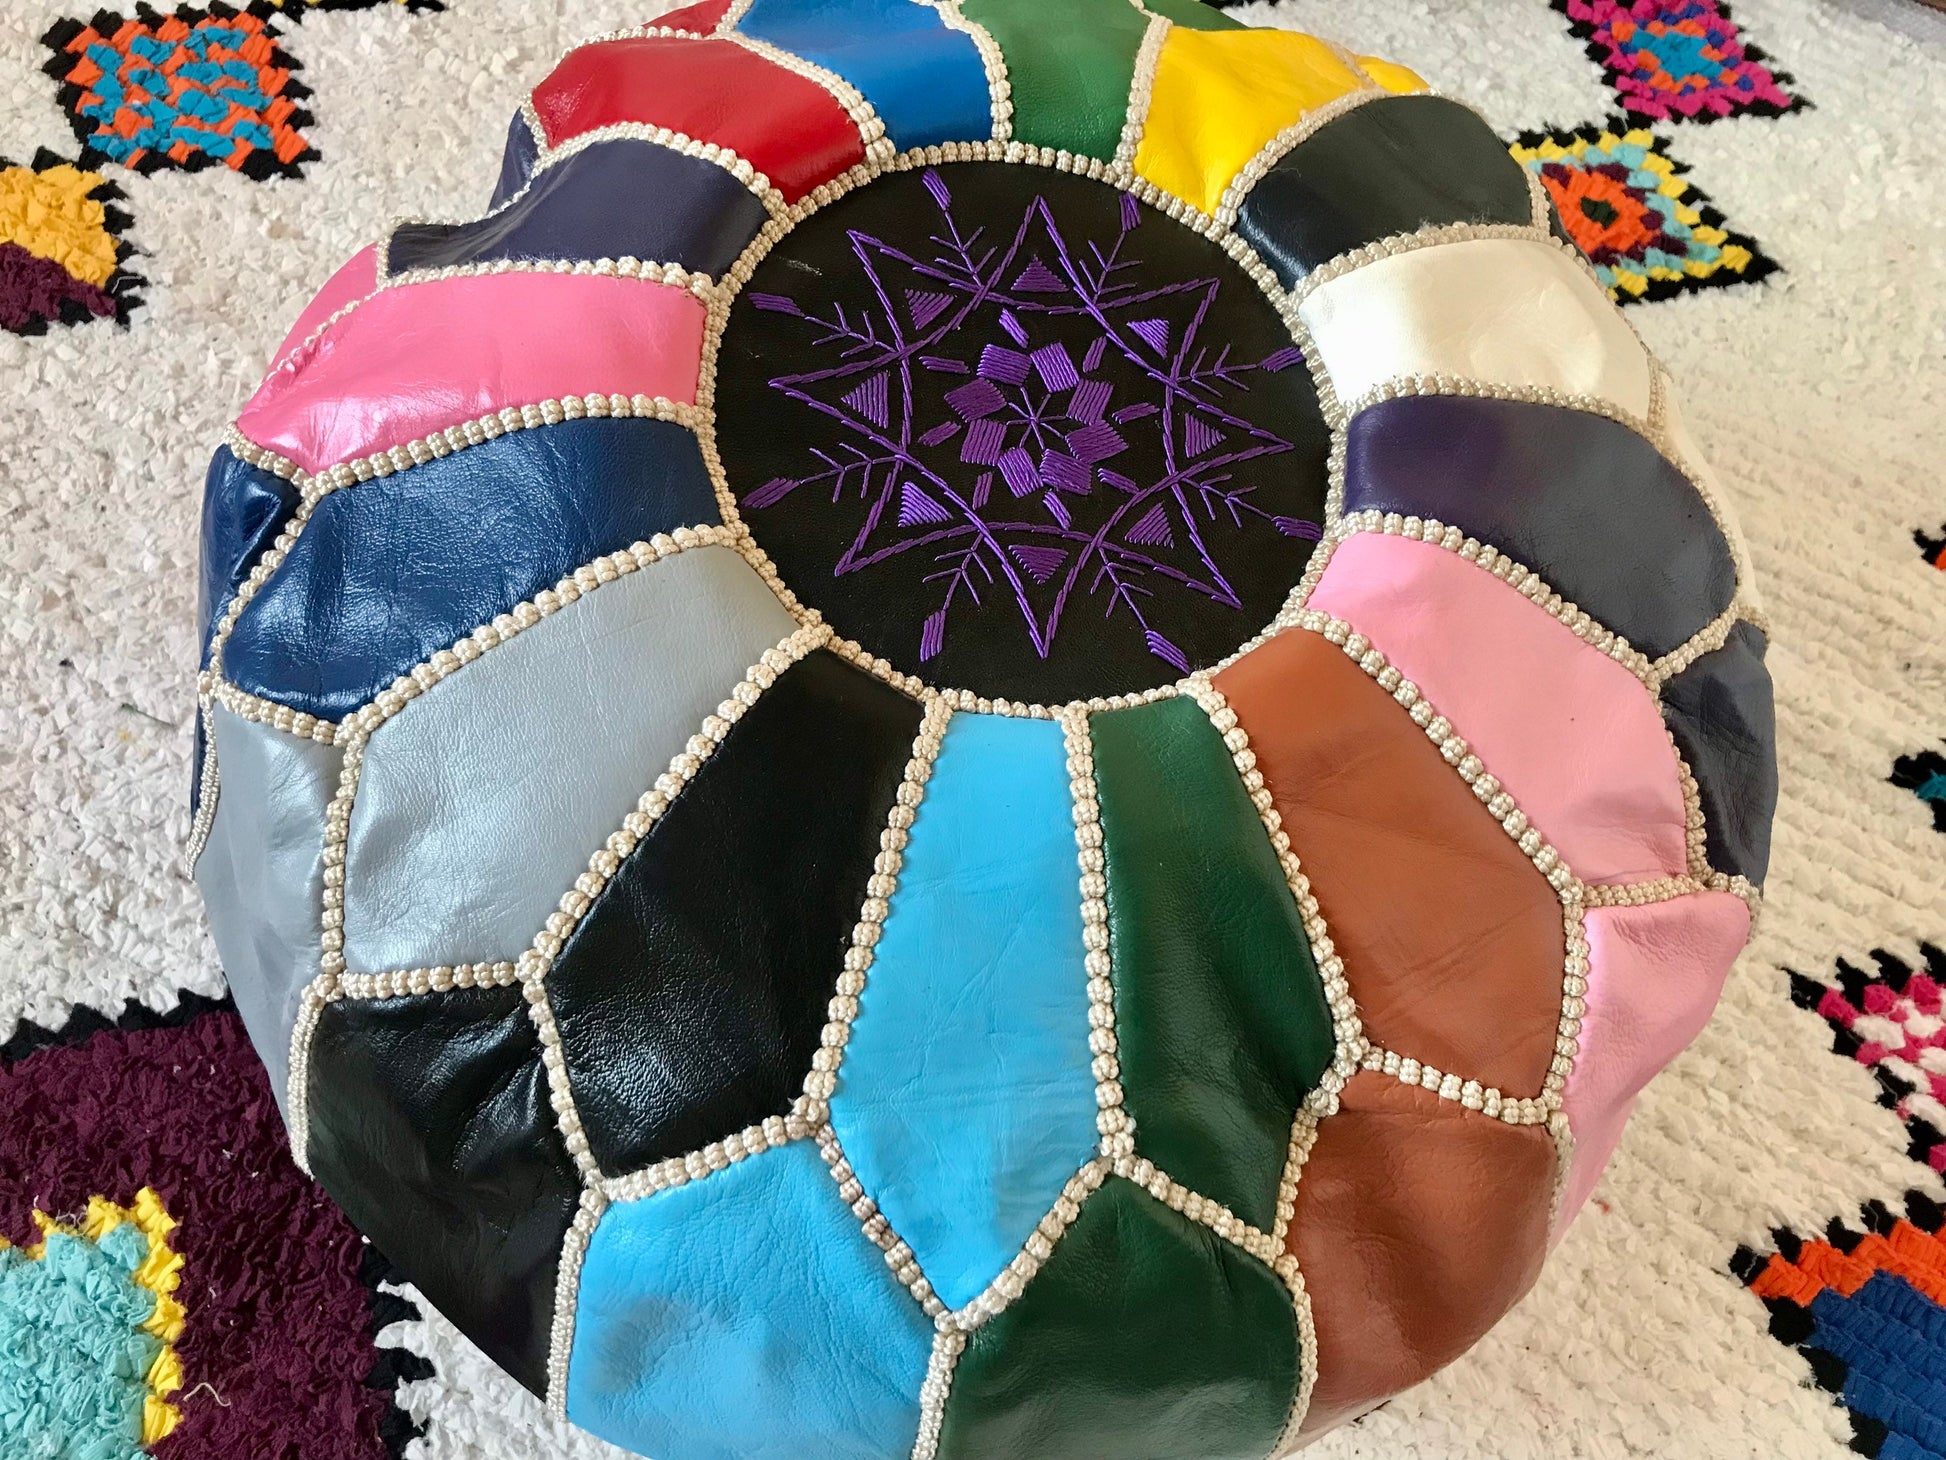 Genuine Moroccan MultiColor handcrafted leather Pouf with stitching,Berber Pouf, traditional Leather Pouf, Ottoman footstool Pouf Home Decor